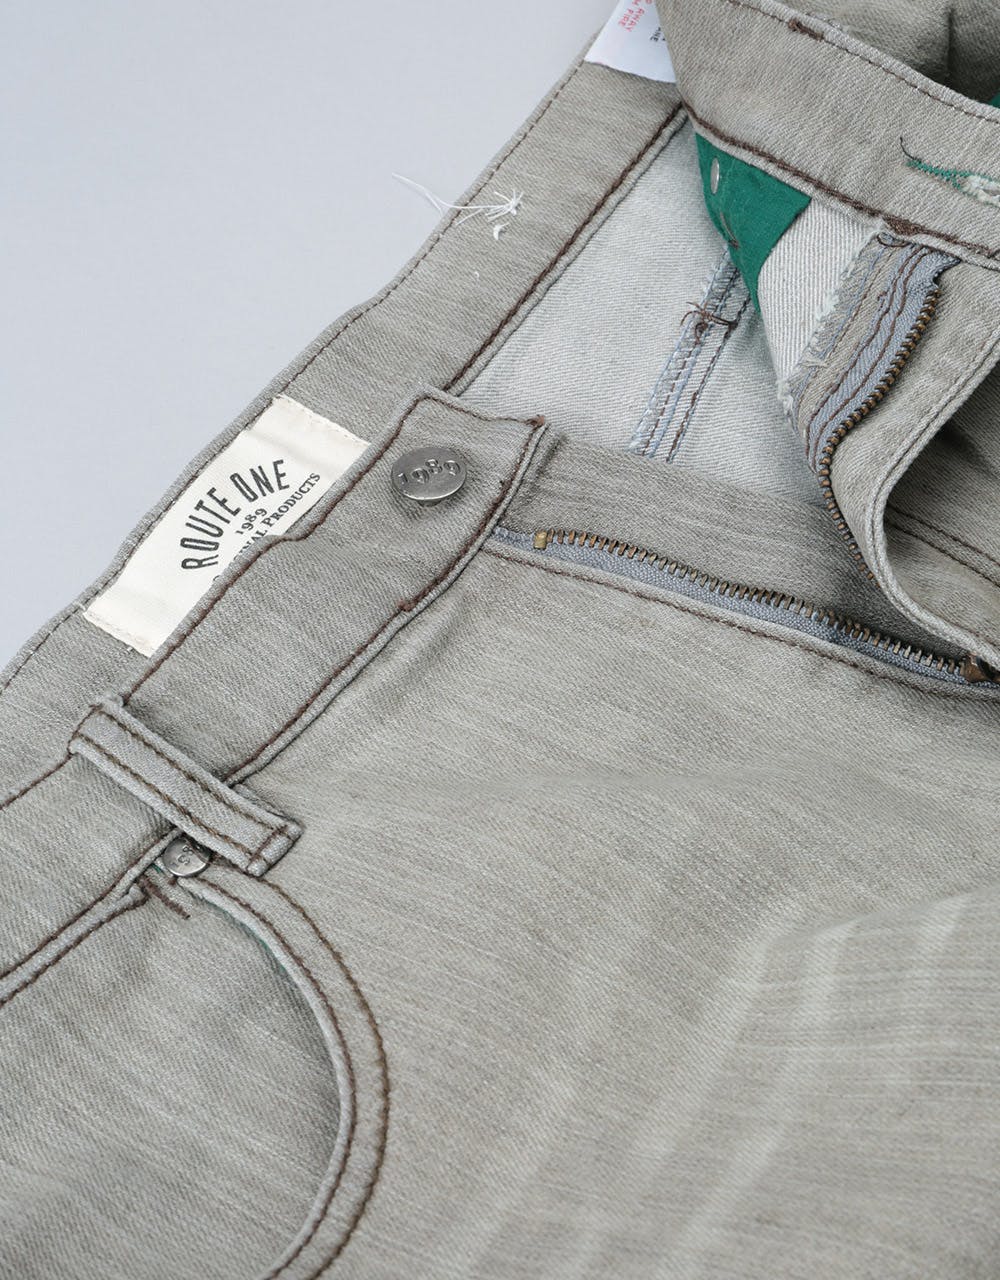 Route One Slim Denim Jeans - Old Washed Grey